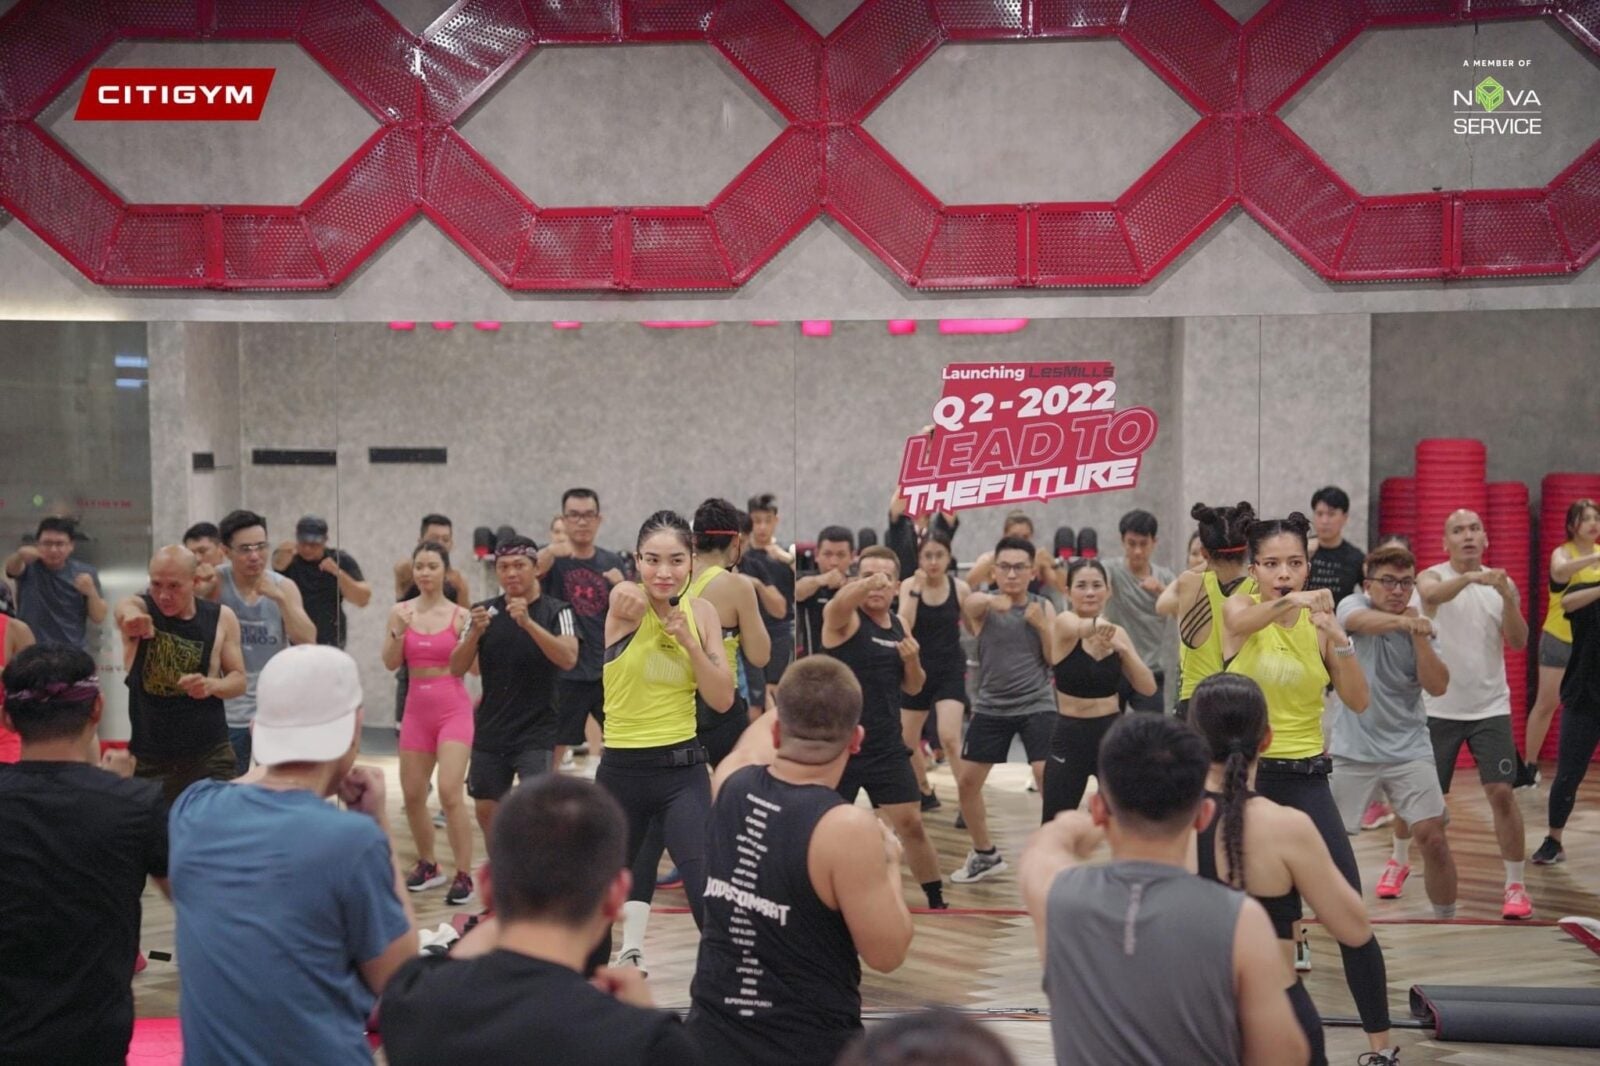 A group of people doing fitness exercises with the help of an instructor at Les Mills in 2022 with the slogan "Lead to the future" printed on the wall.